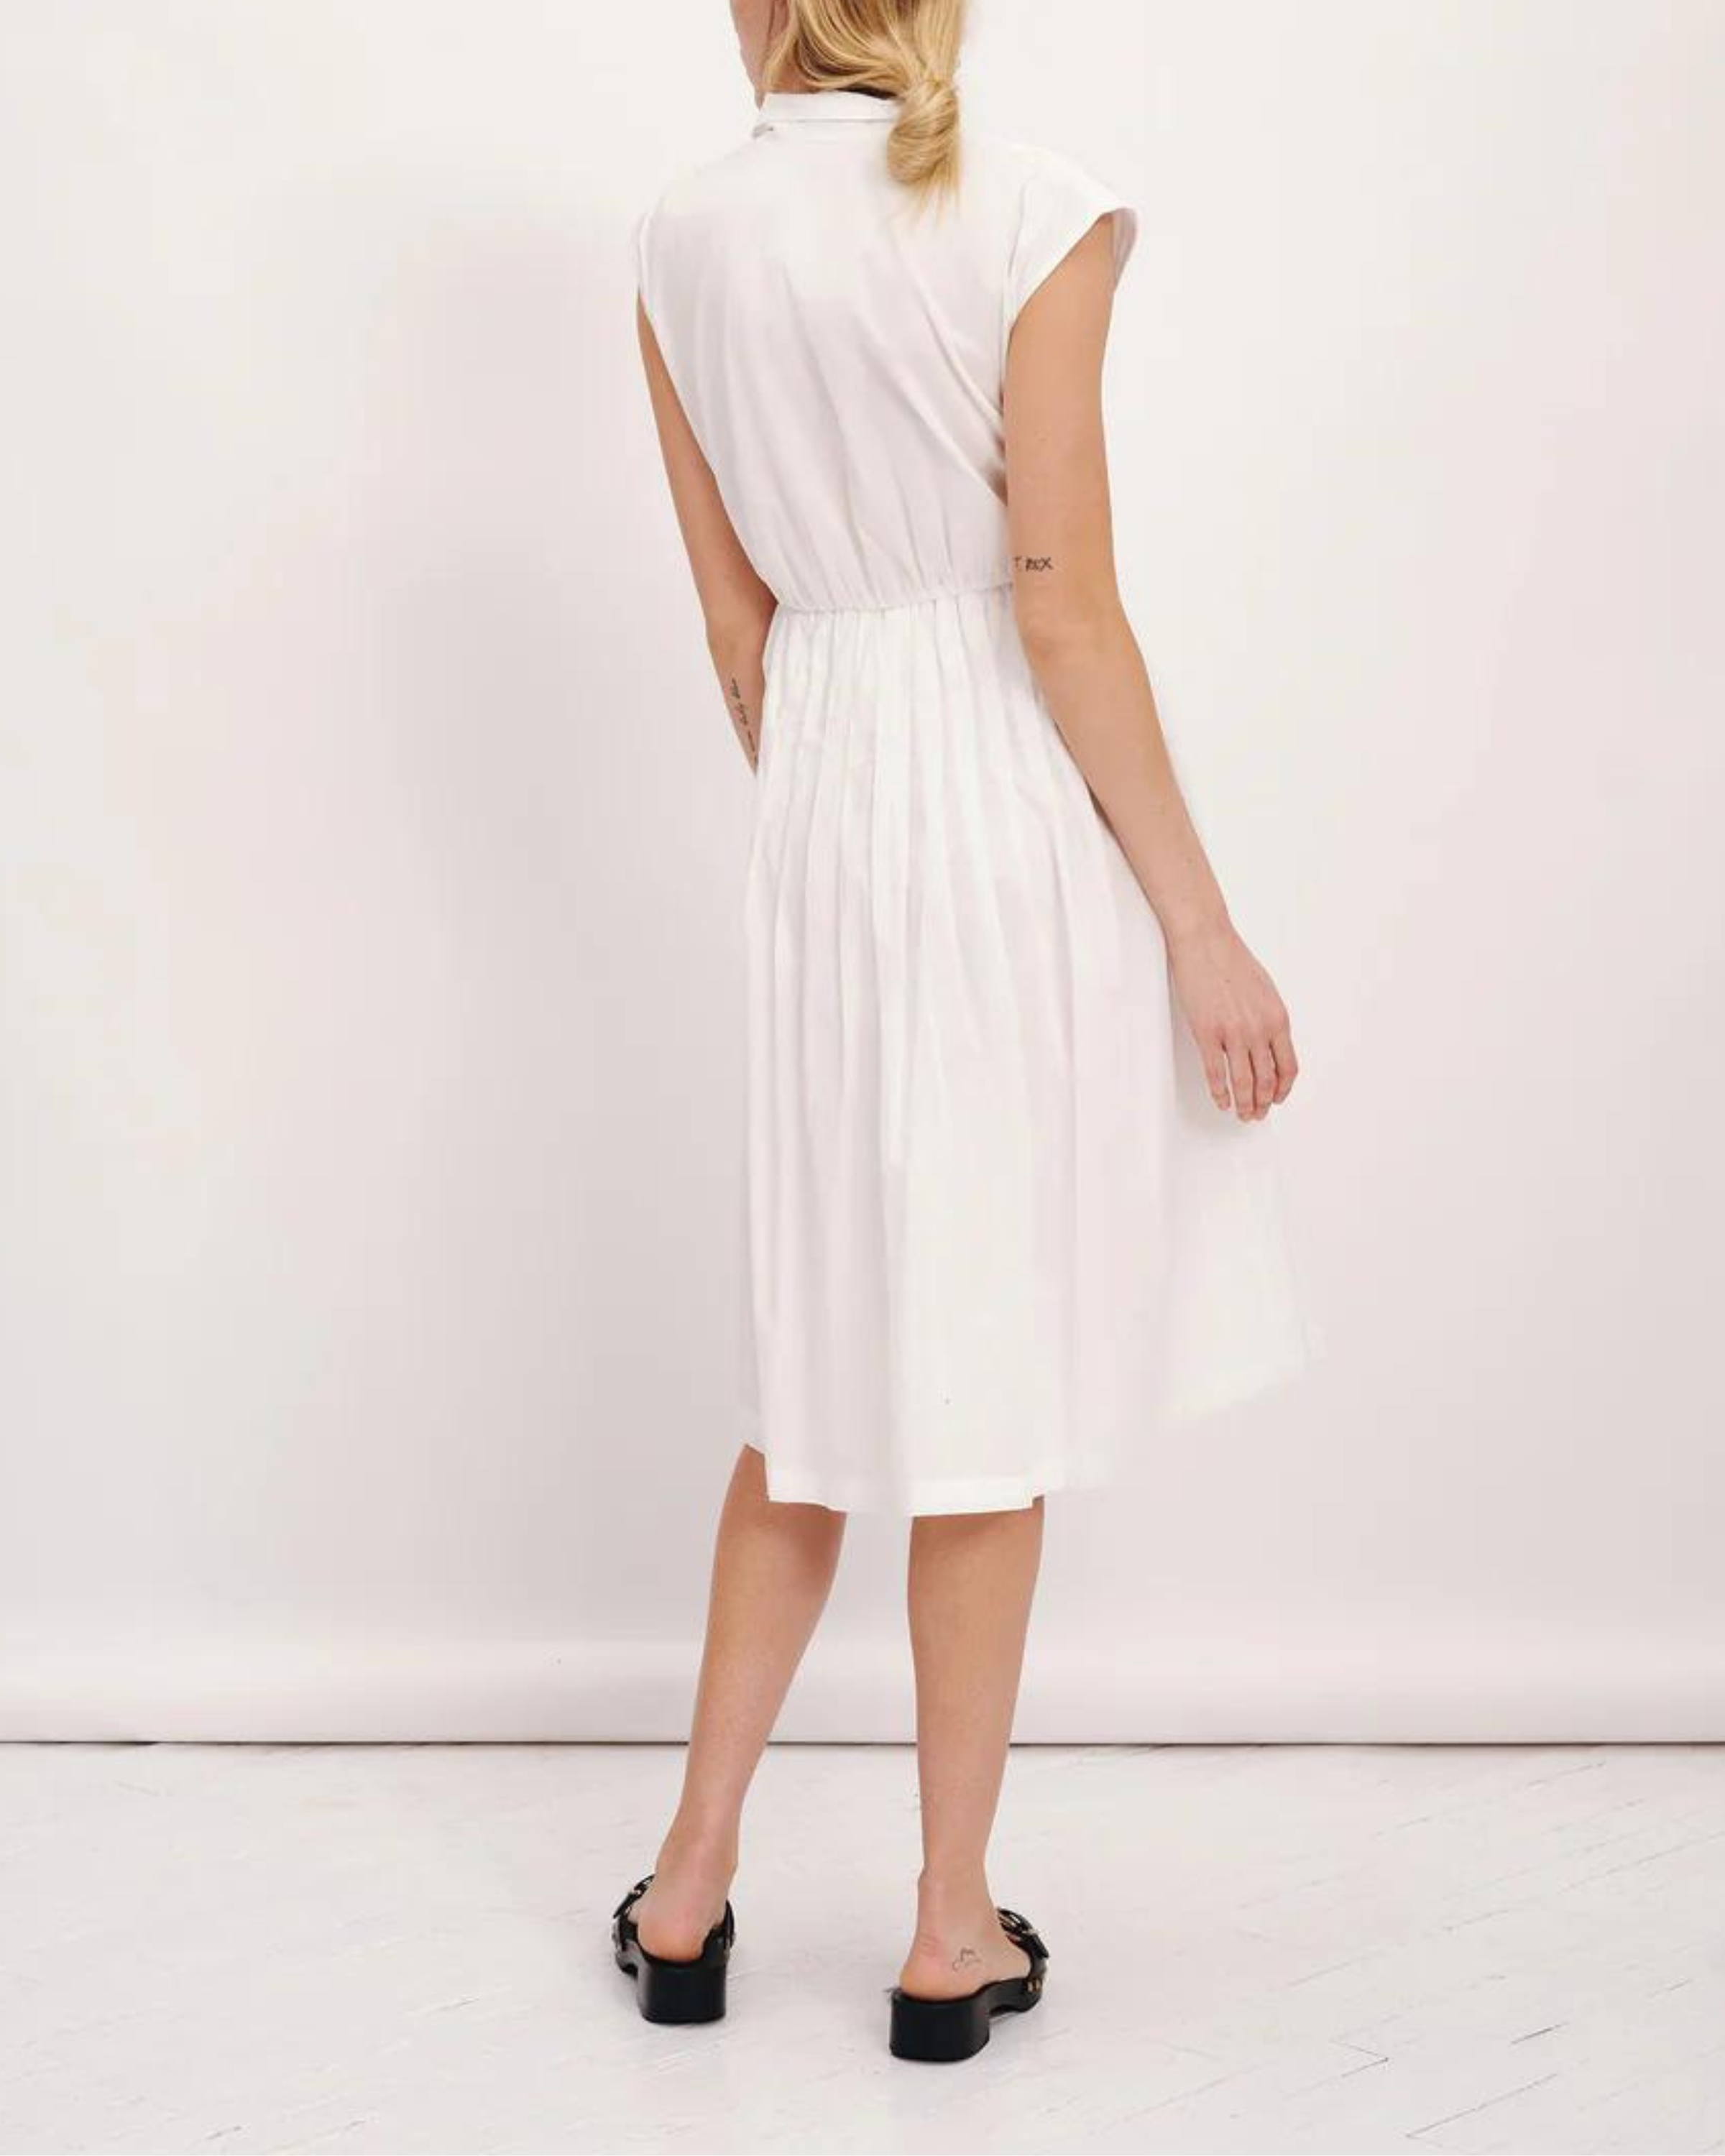 ATM Cotton Viole Sleeveless Shirt Dress in White